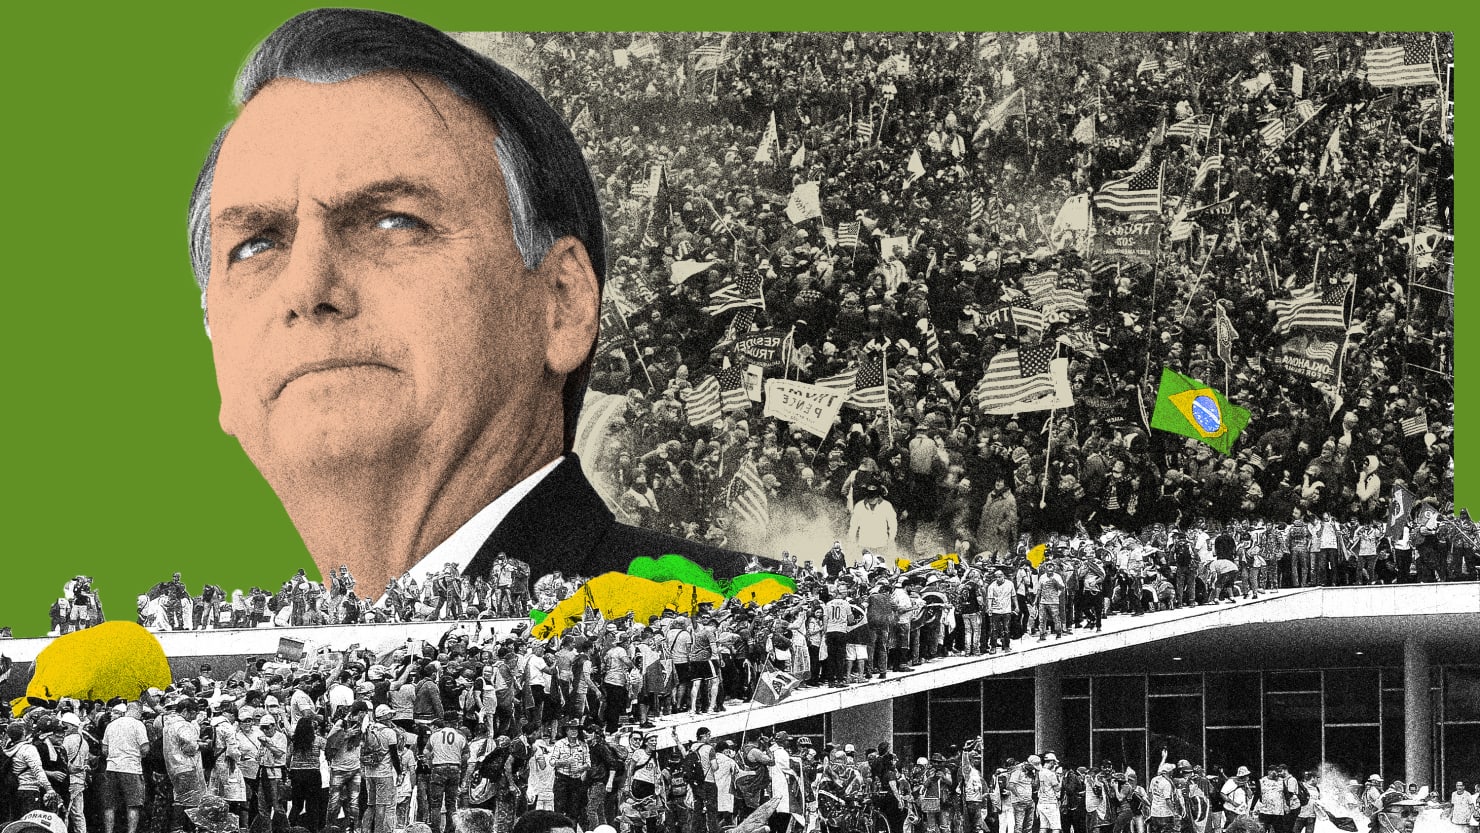 Brazil Is Just the Latest Victim of the Global Fascism Virus